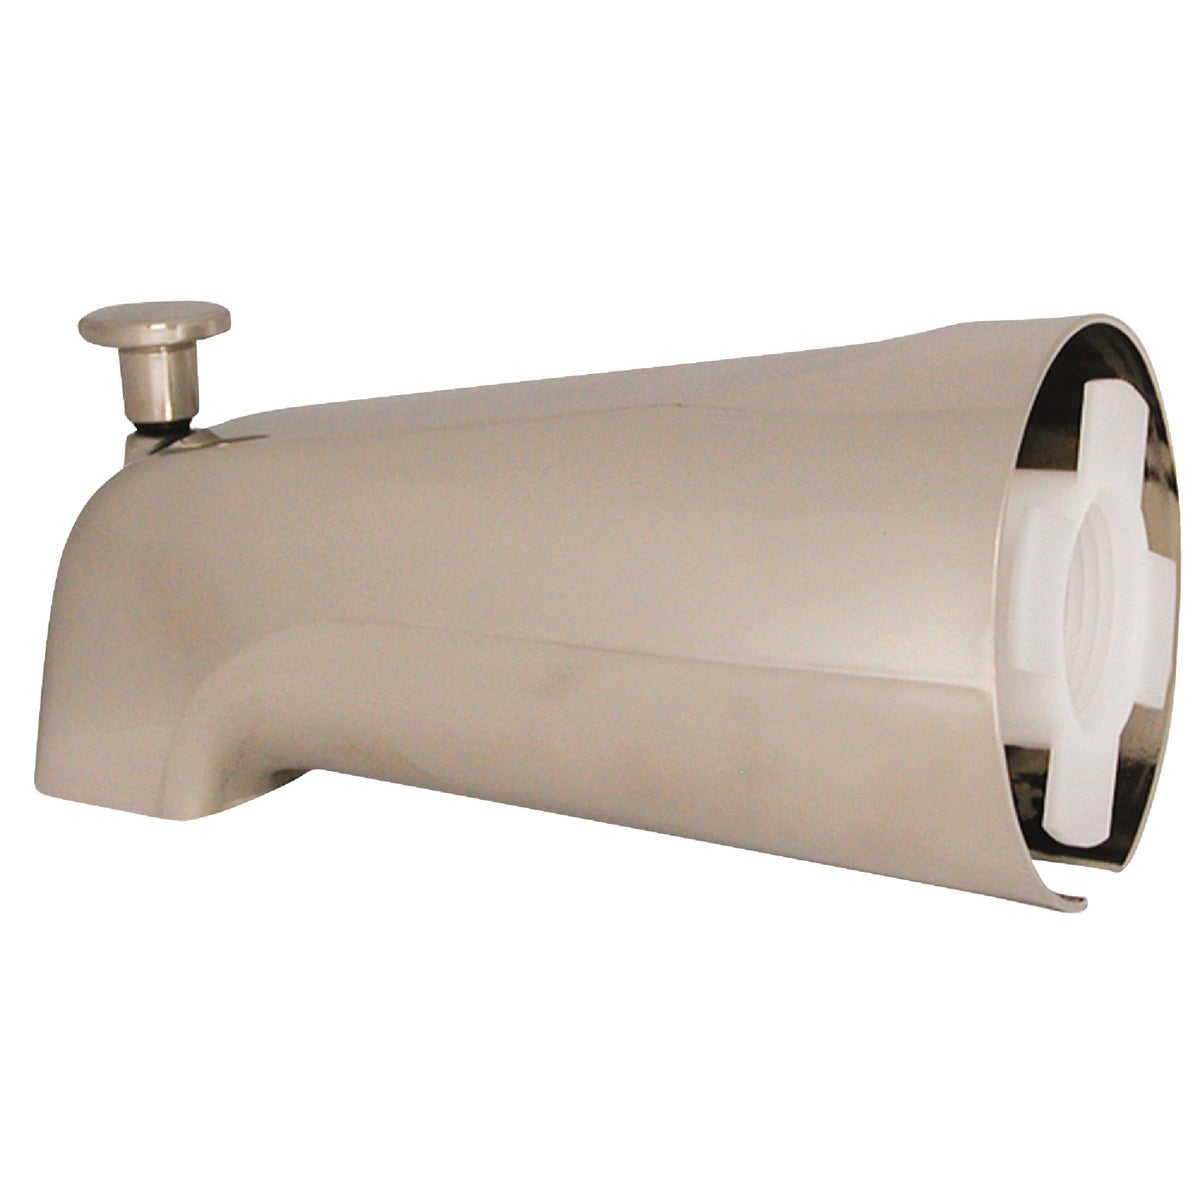 Item 446510, Brushed nickel 3.35 GPM (gallons per minute) universal tub spout.